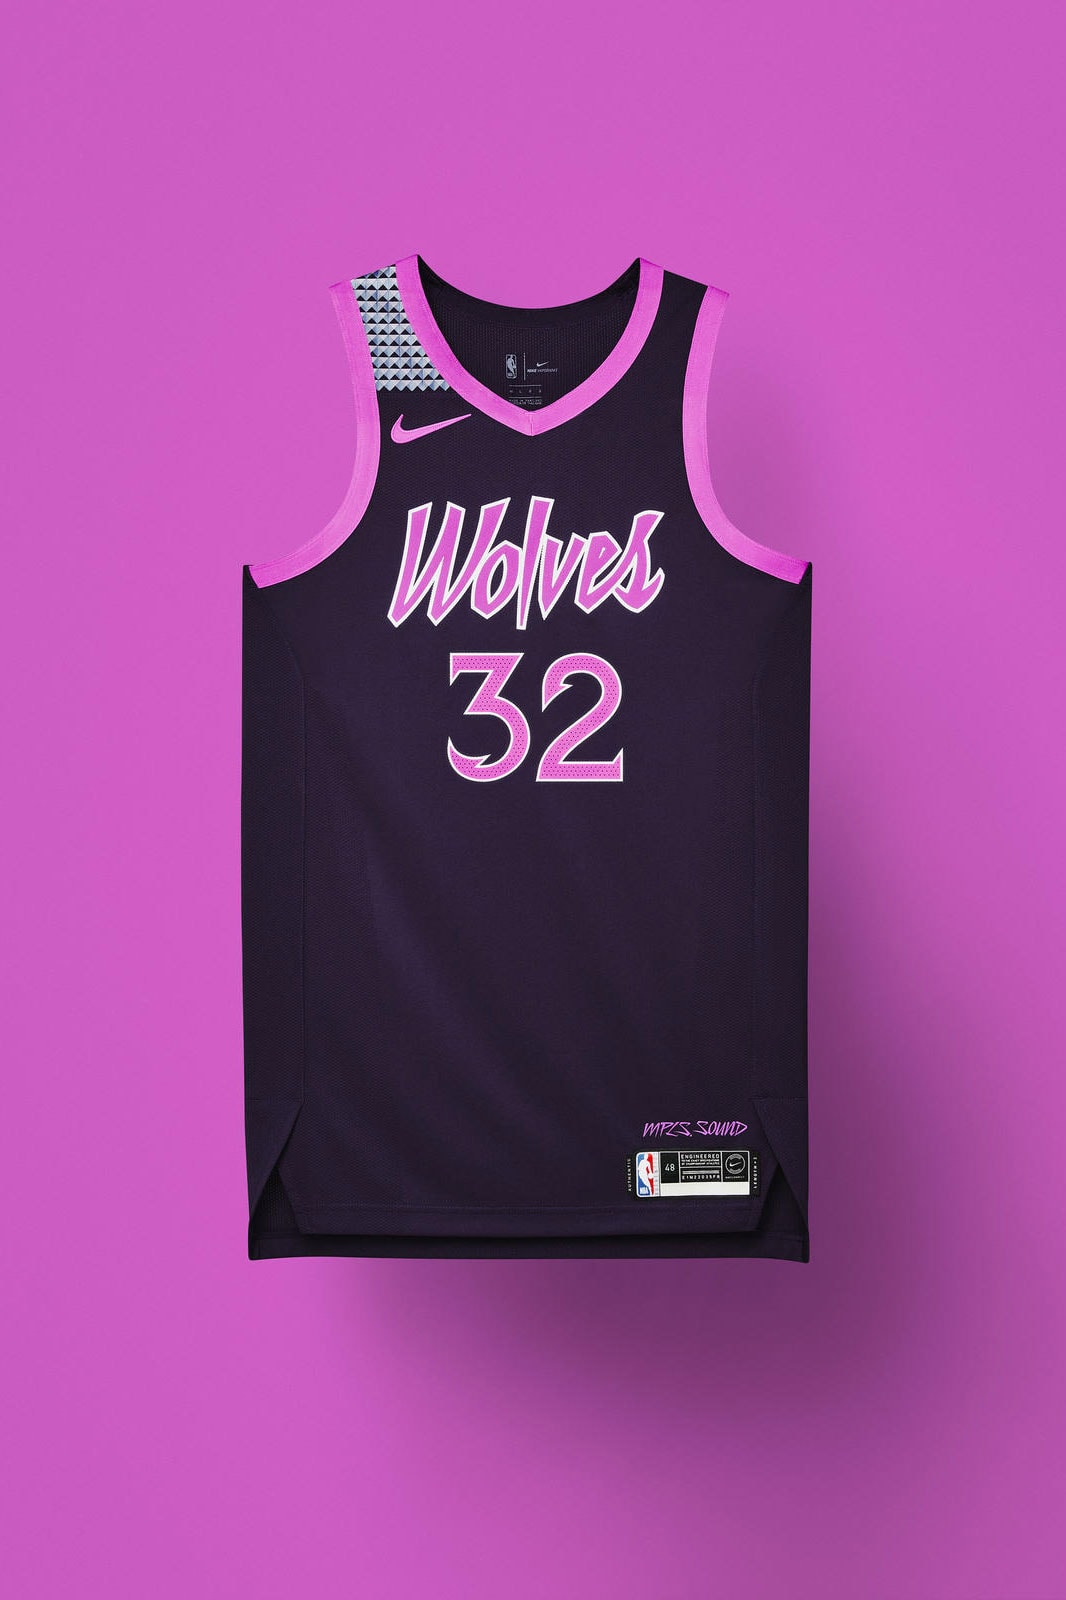 t wolves pink jersey